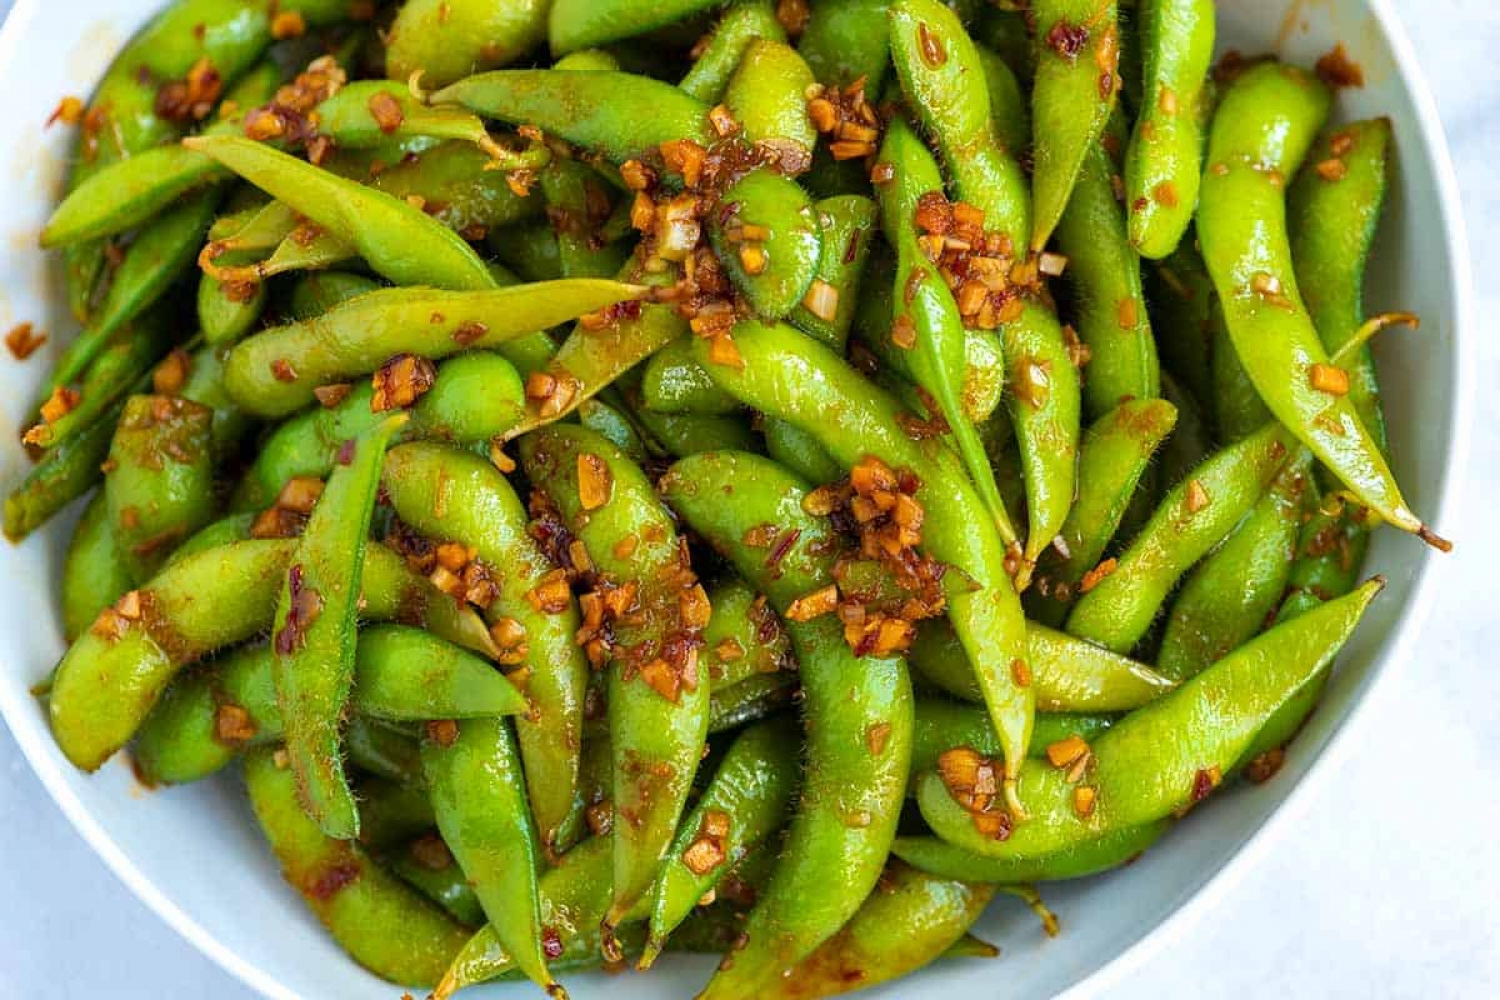 <p>Turn plain ol' edamame beans into a delightful snack with spicy sambal oelek and a handful of Asian cooking staples. You'll get all the flavor in the zingy sauce as you pop the beans out each time. <a href="https://www.inspiredtaste.net/45662/spicy-edamame/" rel="noopener">Get the recipe here.</a></p>